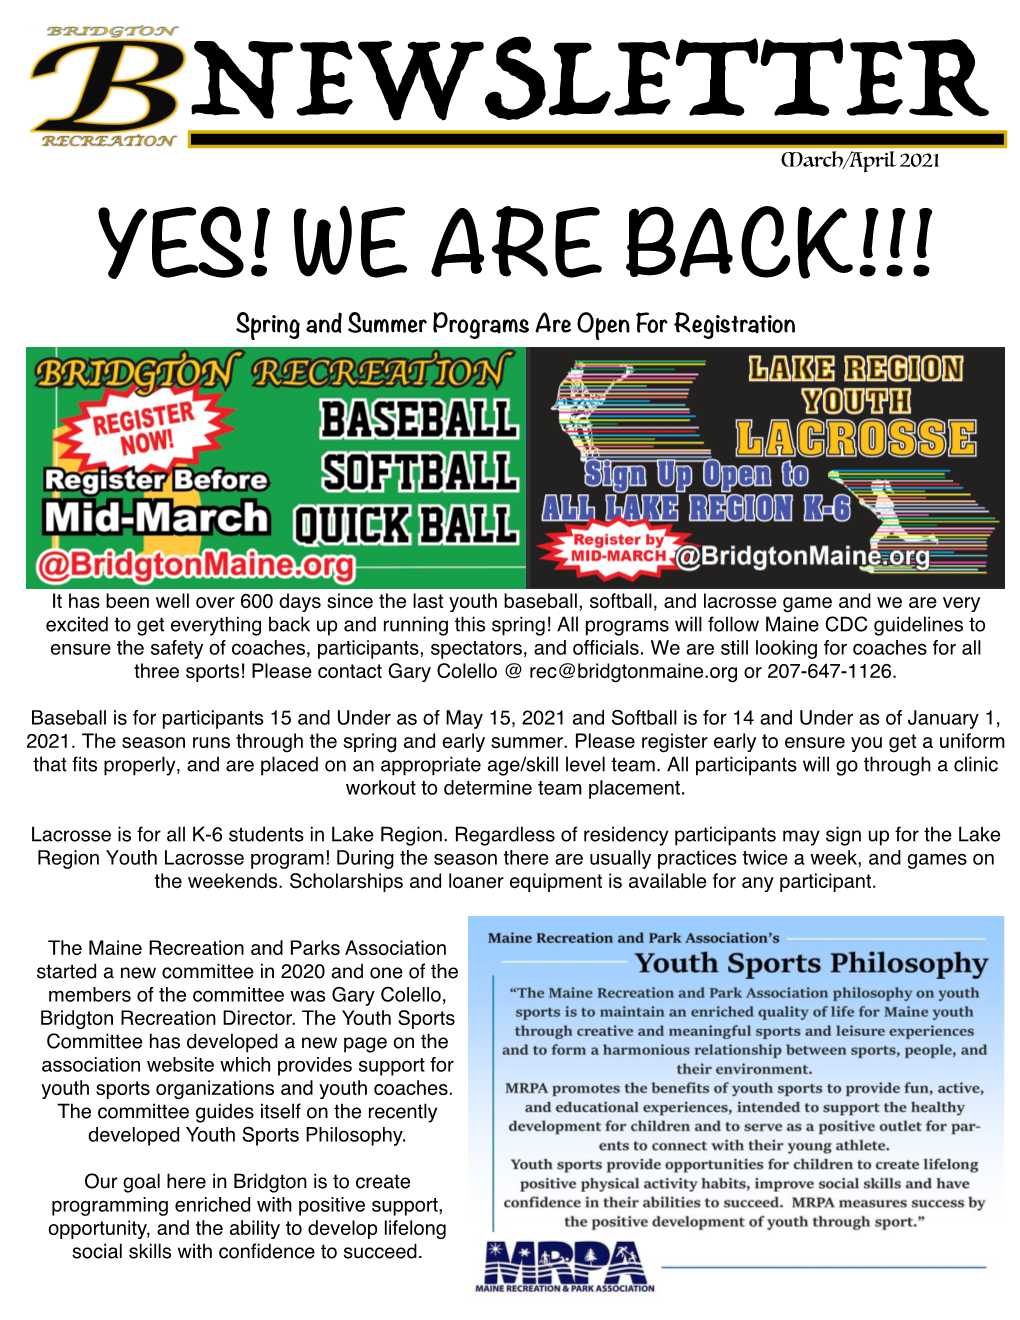 Newsletter March April 2021